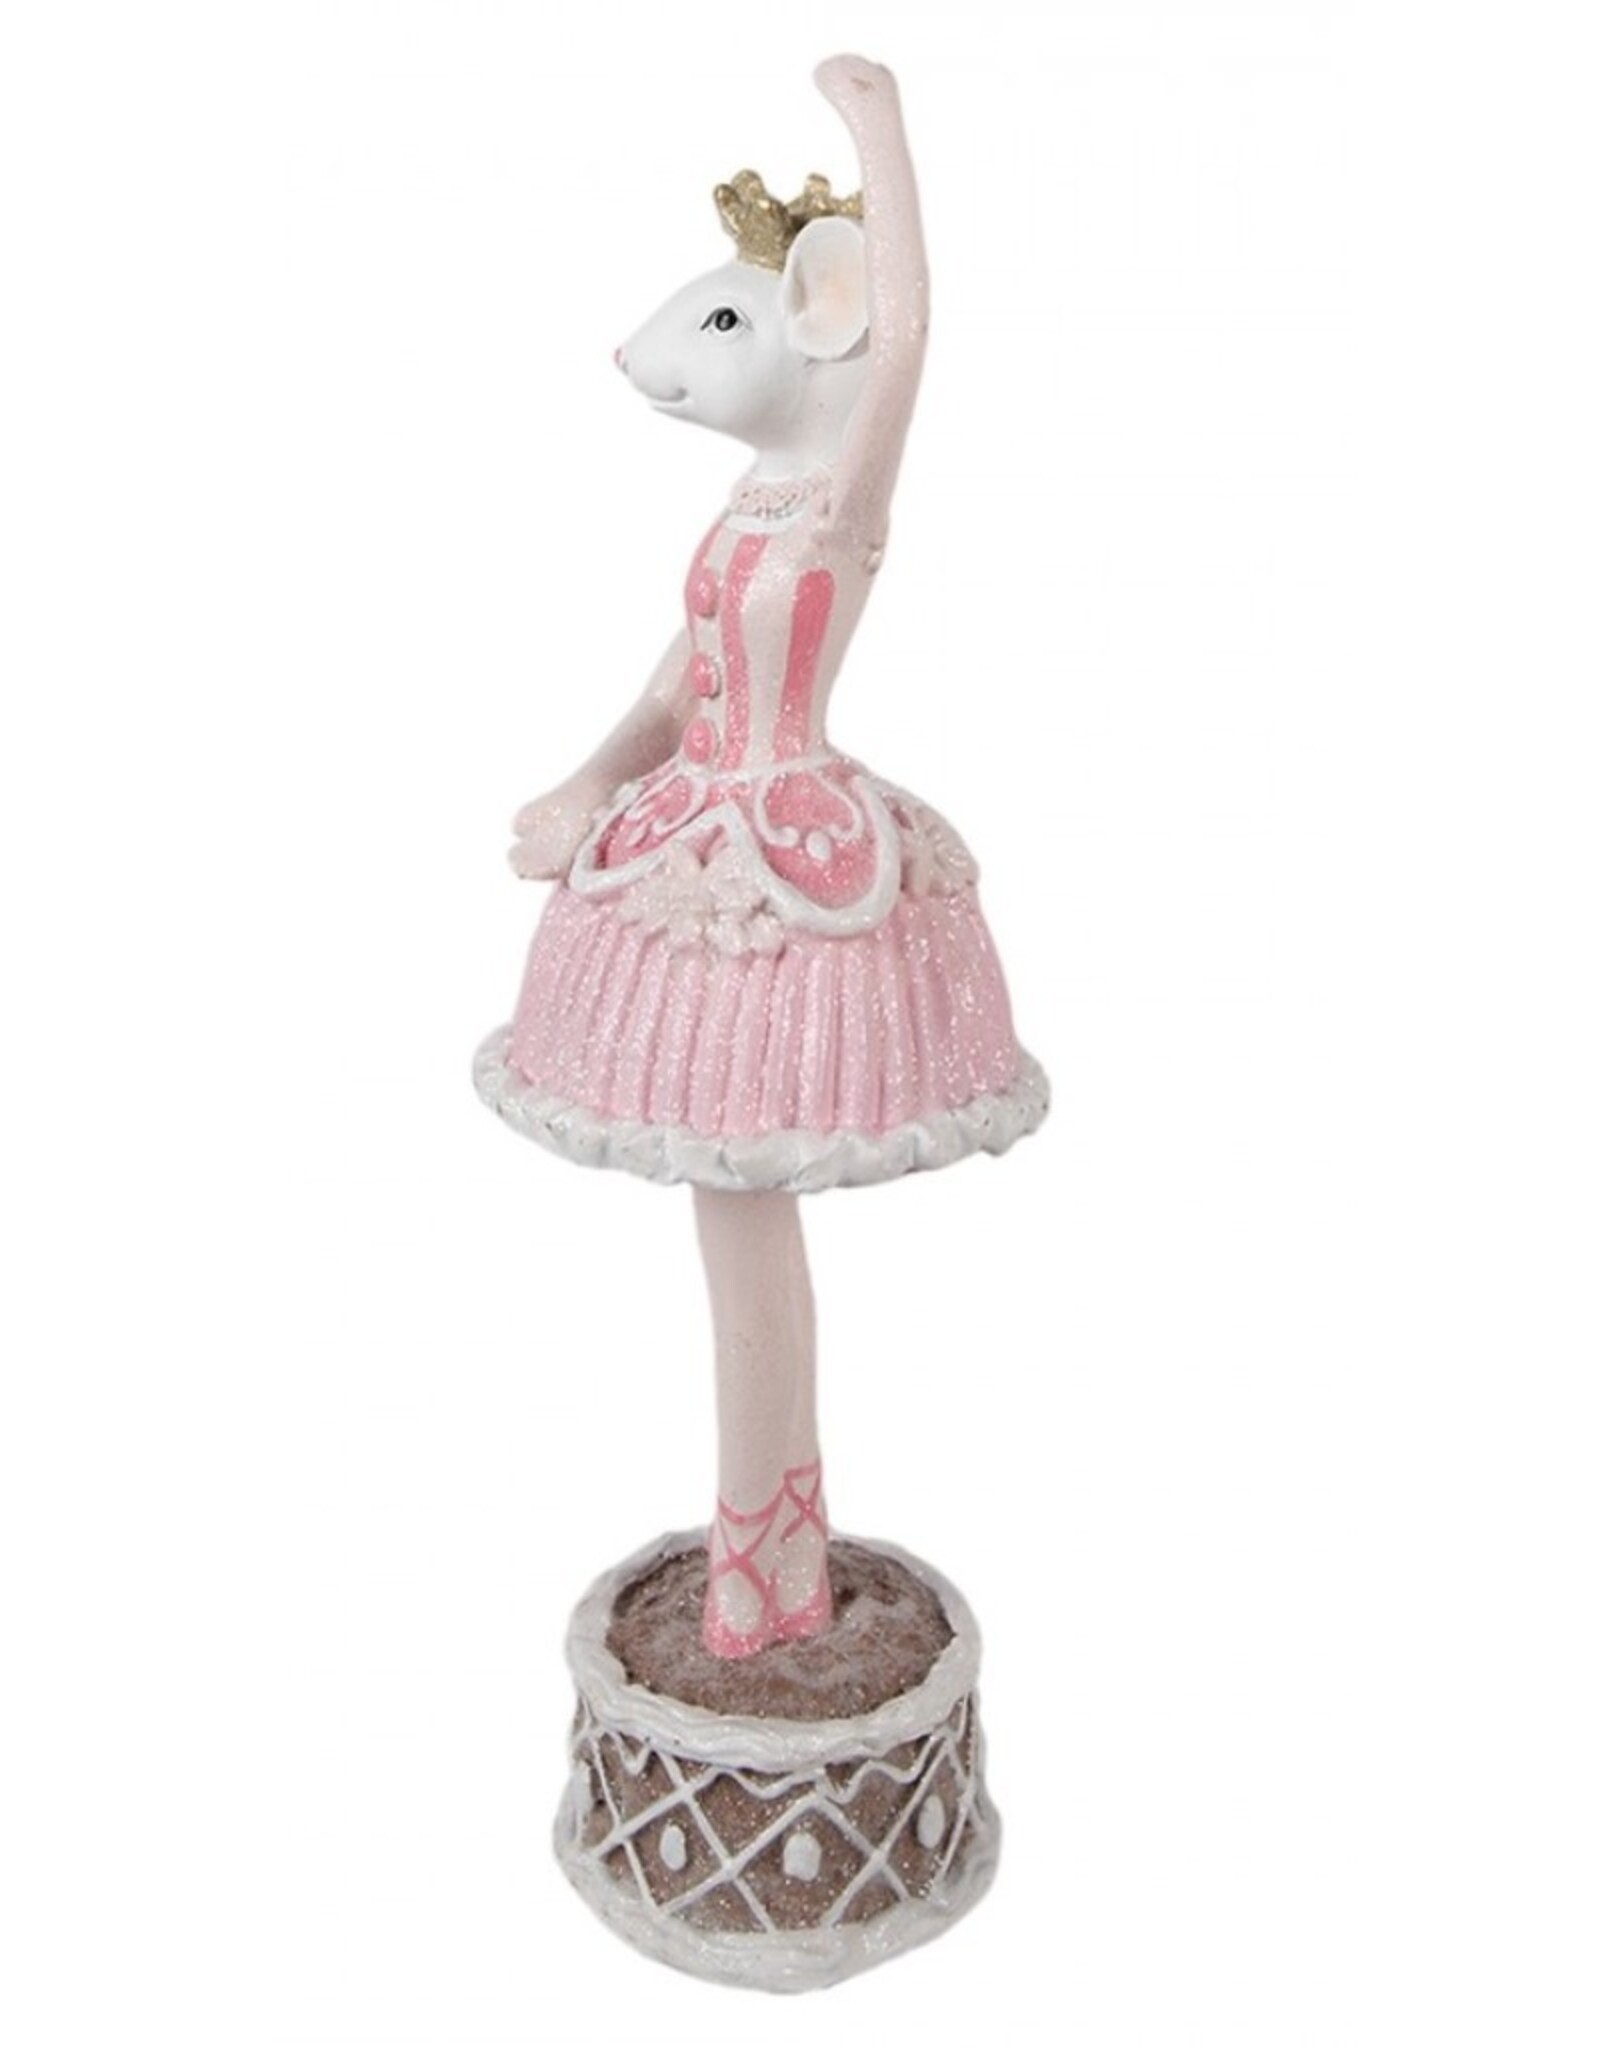 C&E Giftware Figurines Collectables - Figurine Mouse Ballerina Dancing 27cm